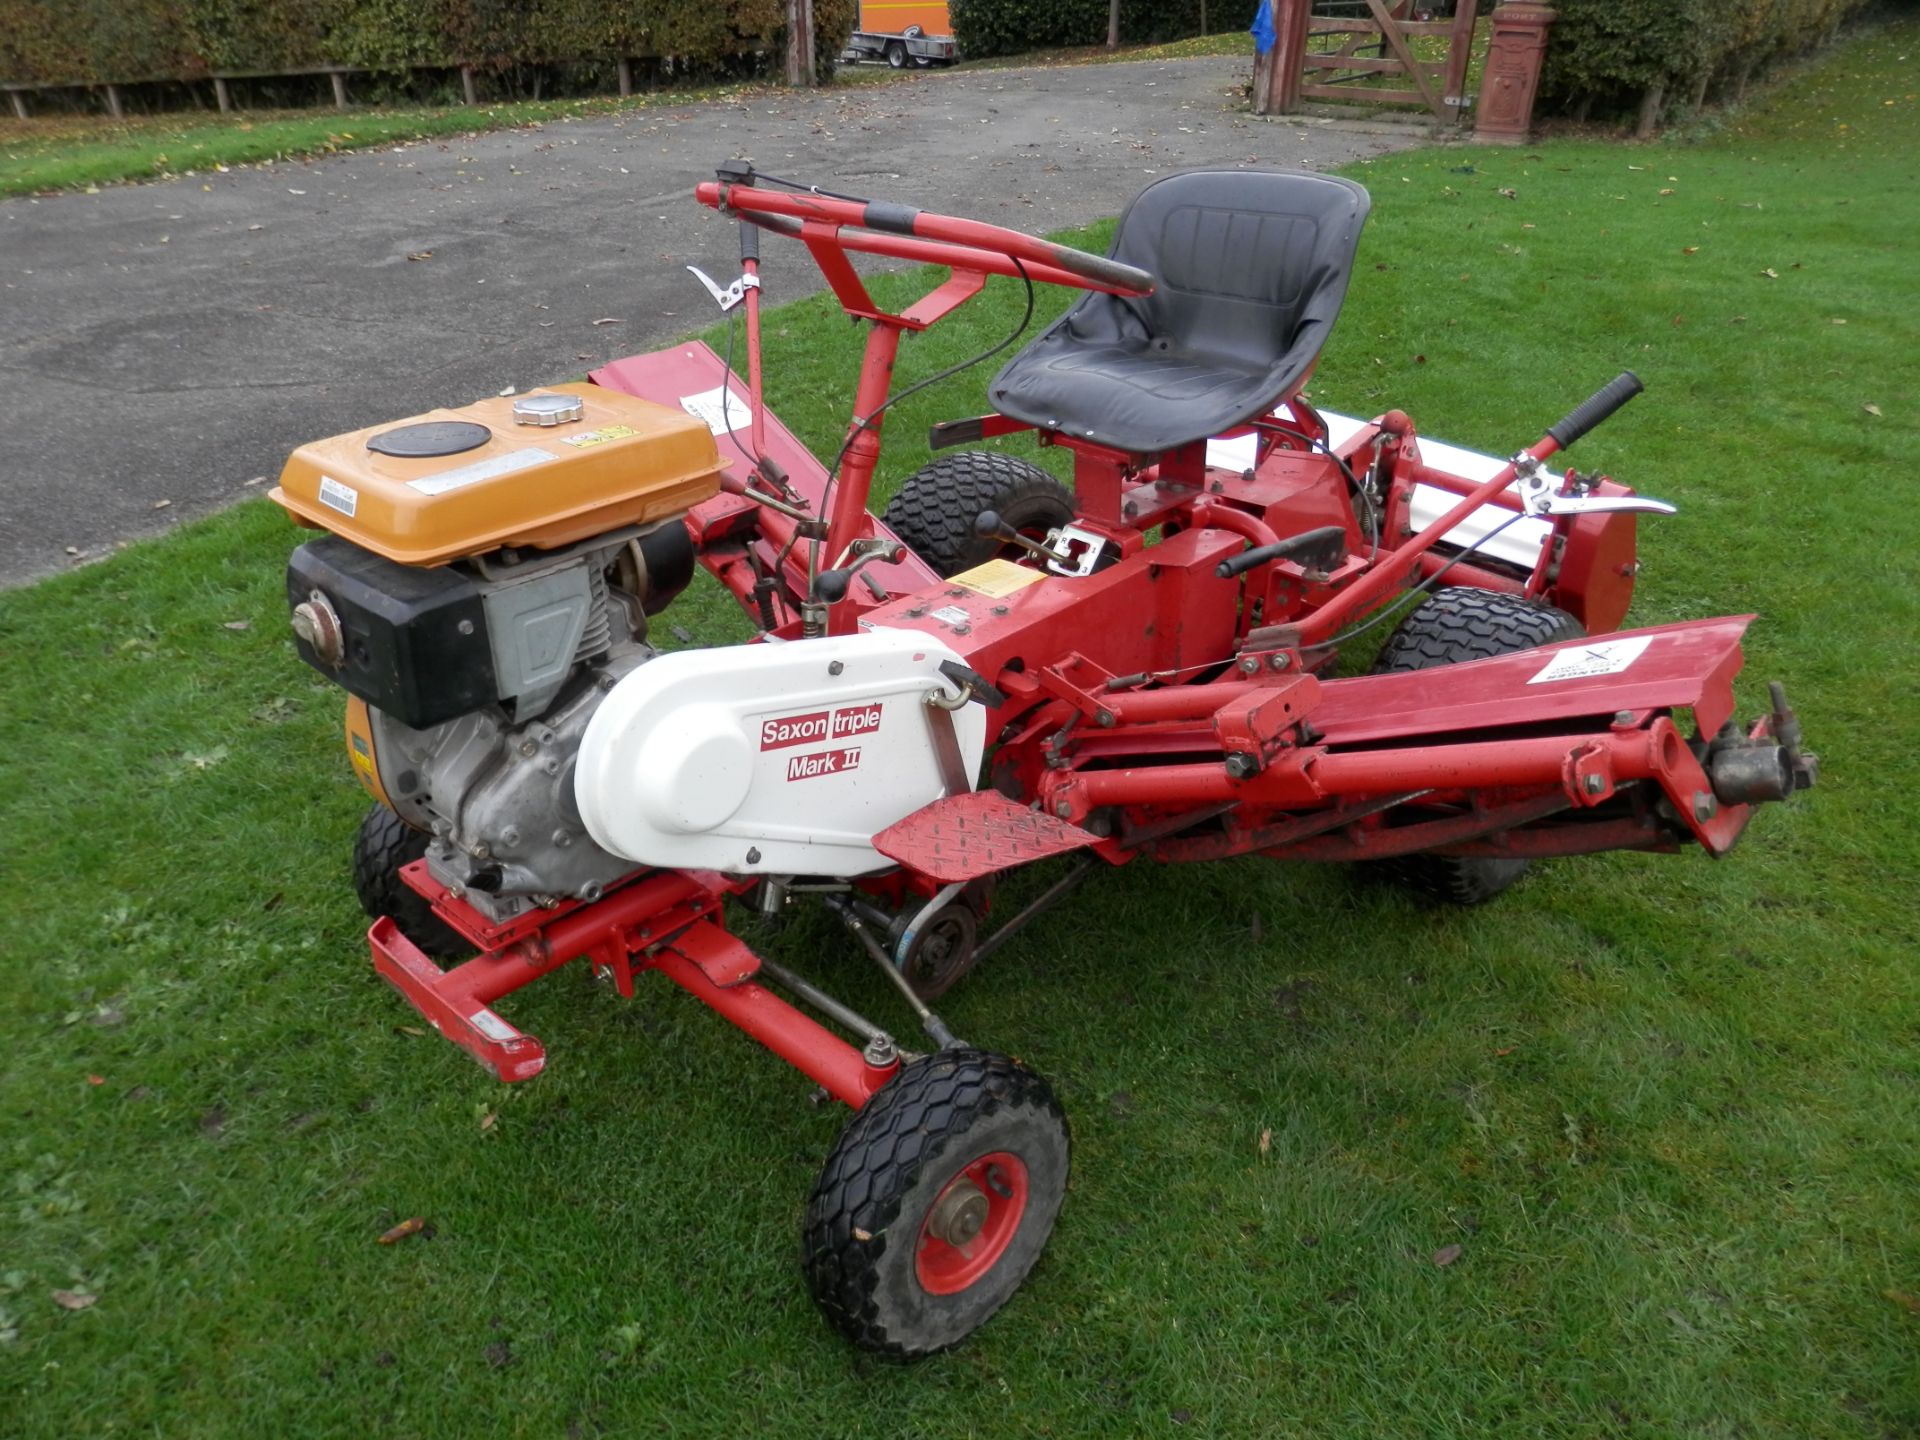 ALL WORKING SAXON TRIPLE MK2 RIDE ON MOWER, UPGRADED WITH GEARS, BRAKE PEDAL & DIFF LOCK. - Image 4 of 14